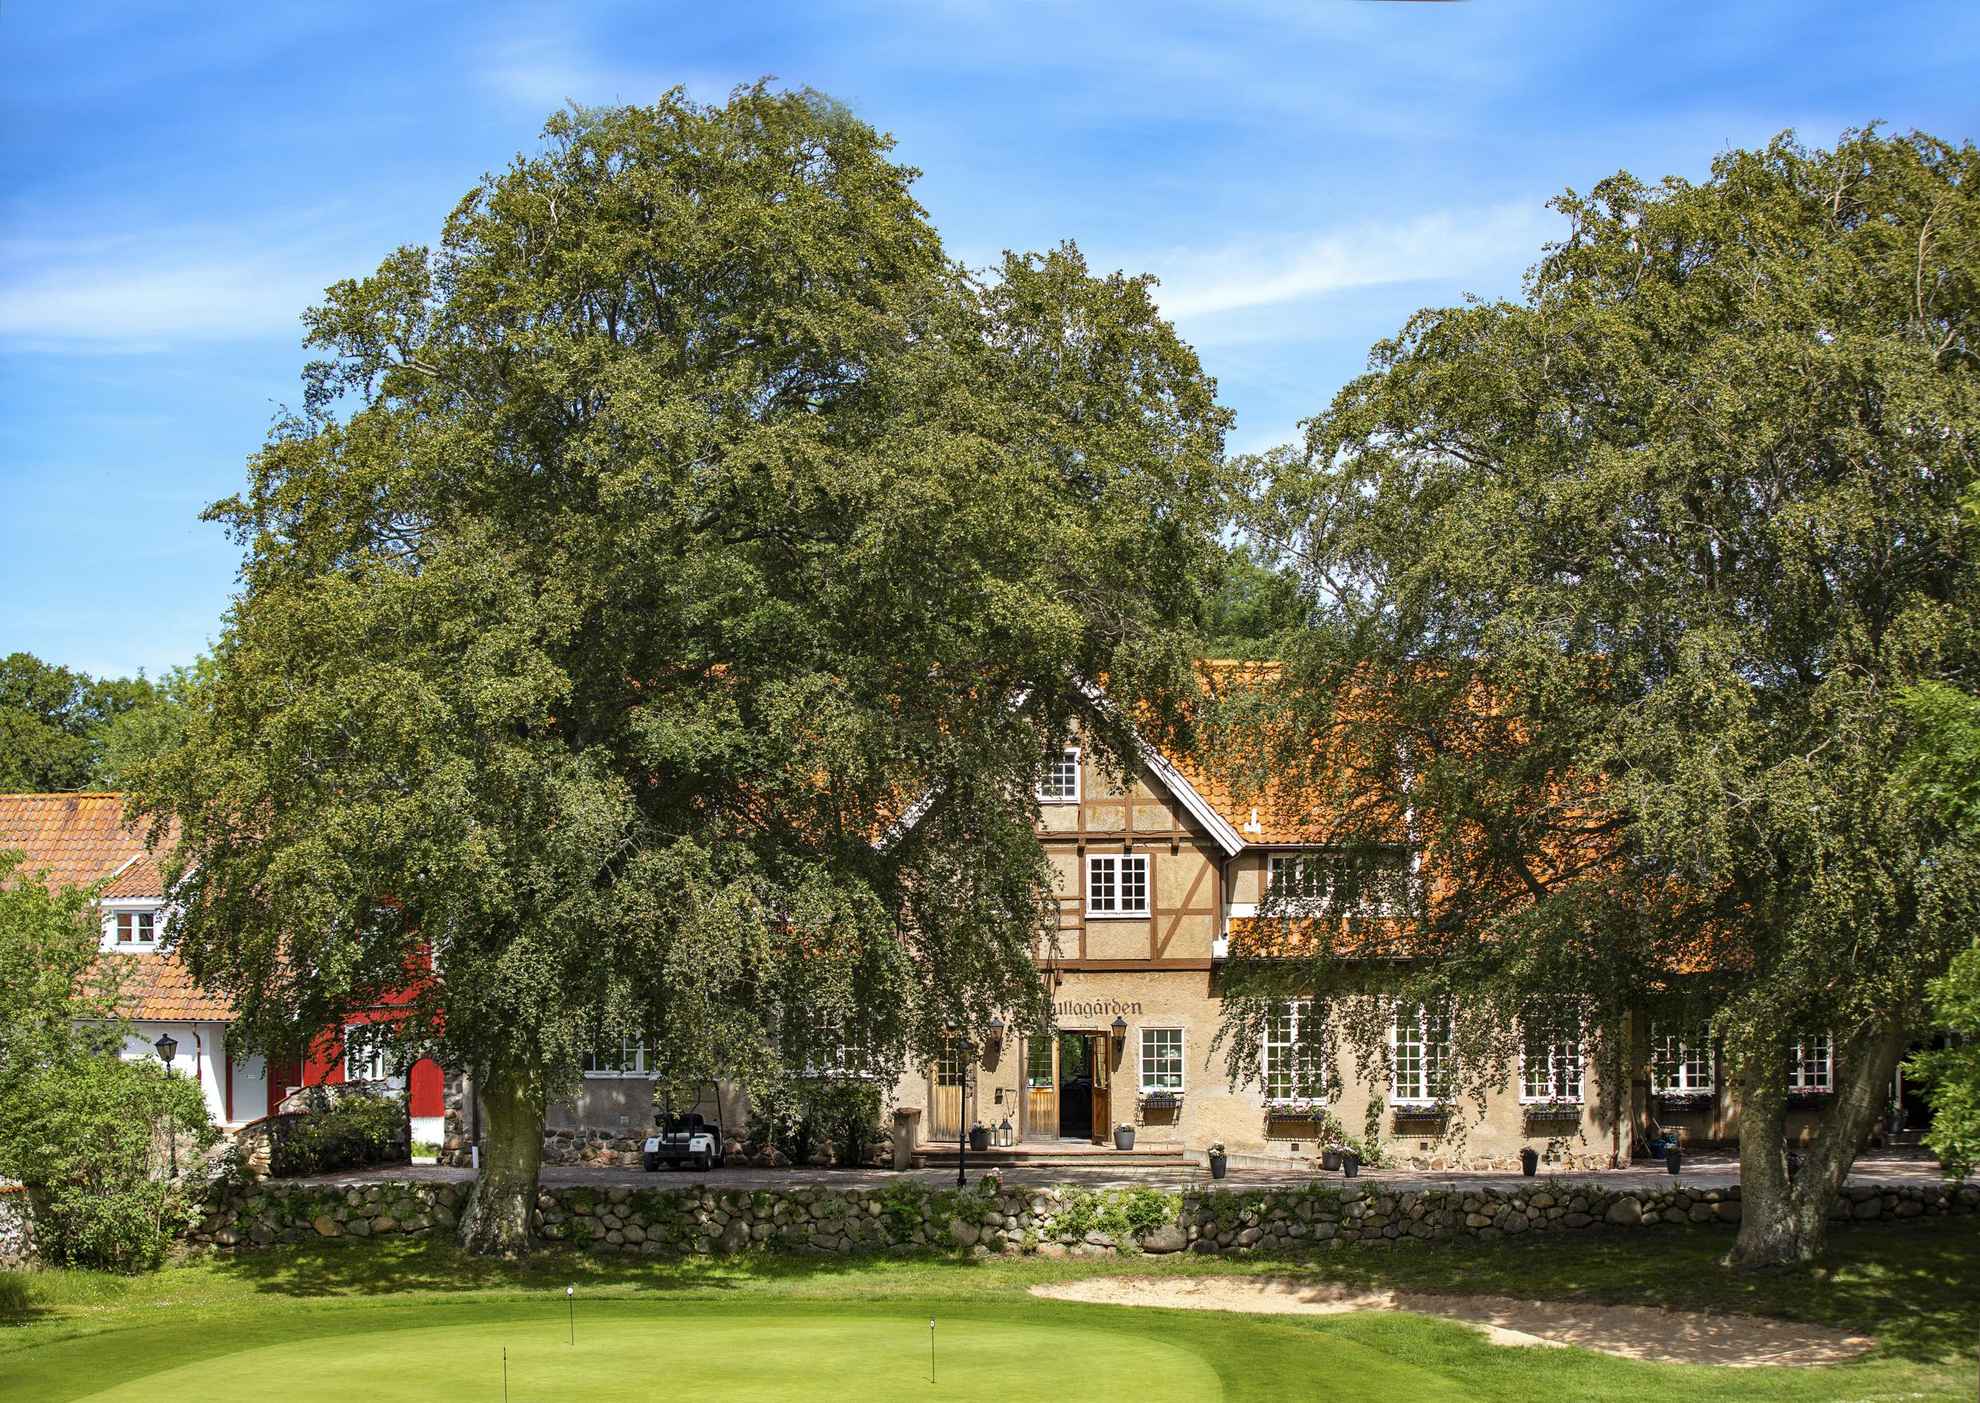 The lush exterior of Kullagårdens Wärdshus in Skåne. The red-and-brown building is surrounded by green trees and it is a sunny summer day.